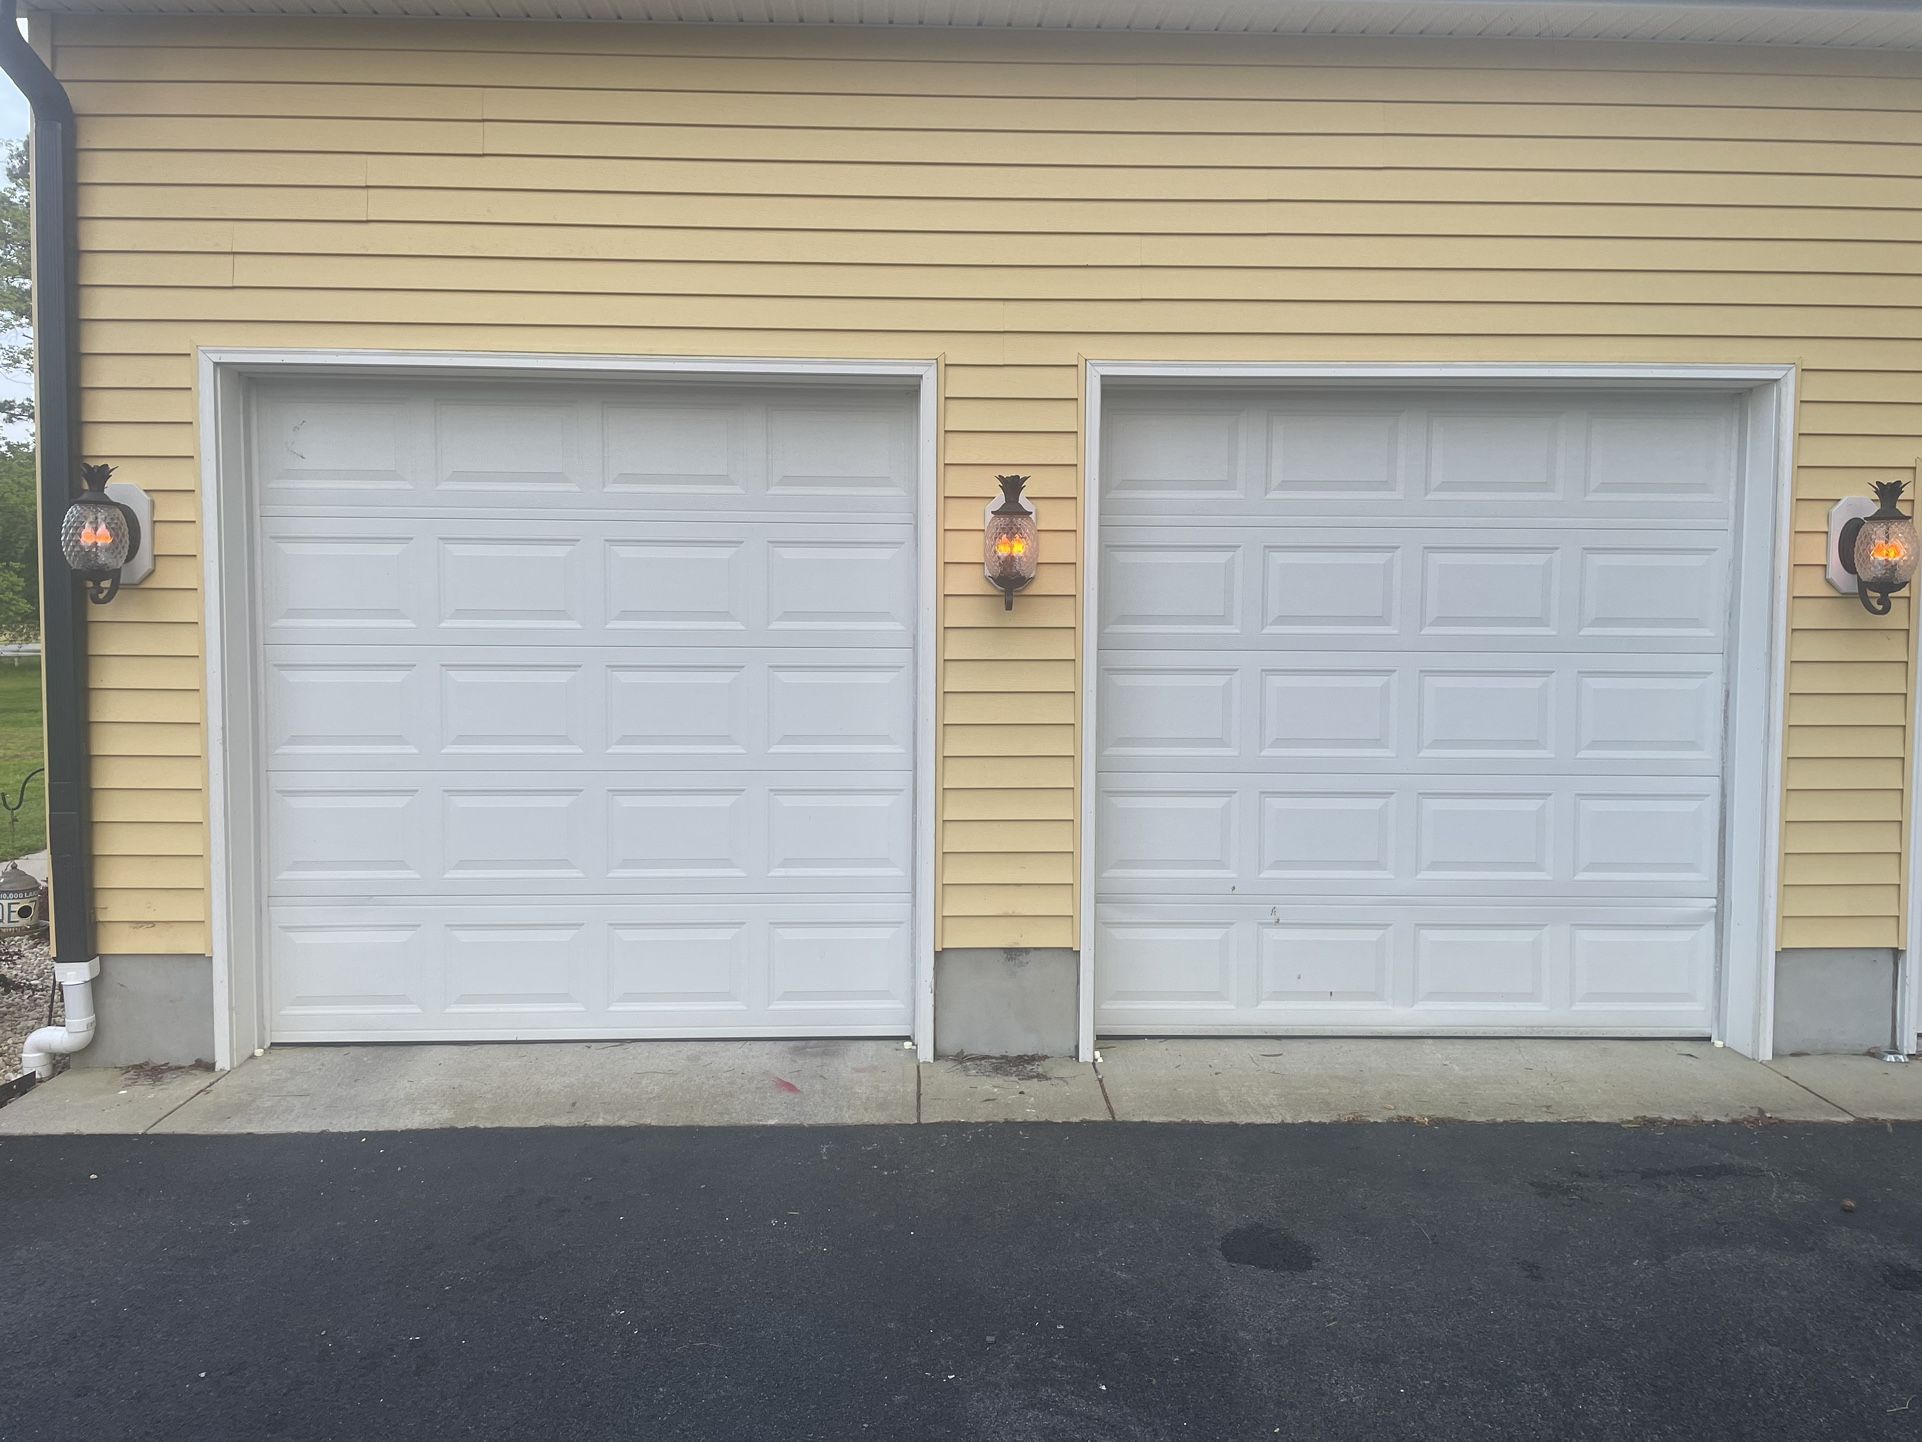 2 steel installed garage doors in great condition, Comes with hardware, 2 door remote  This would be perfect if you building a shed. The doors will be